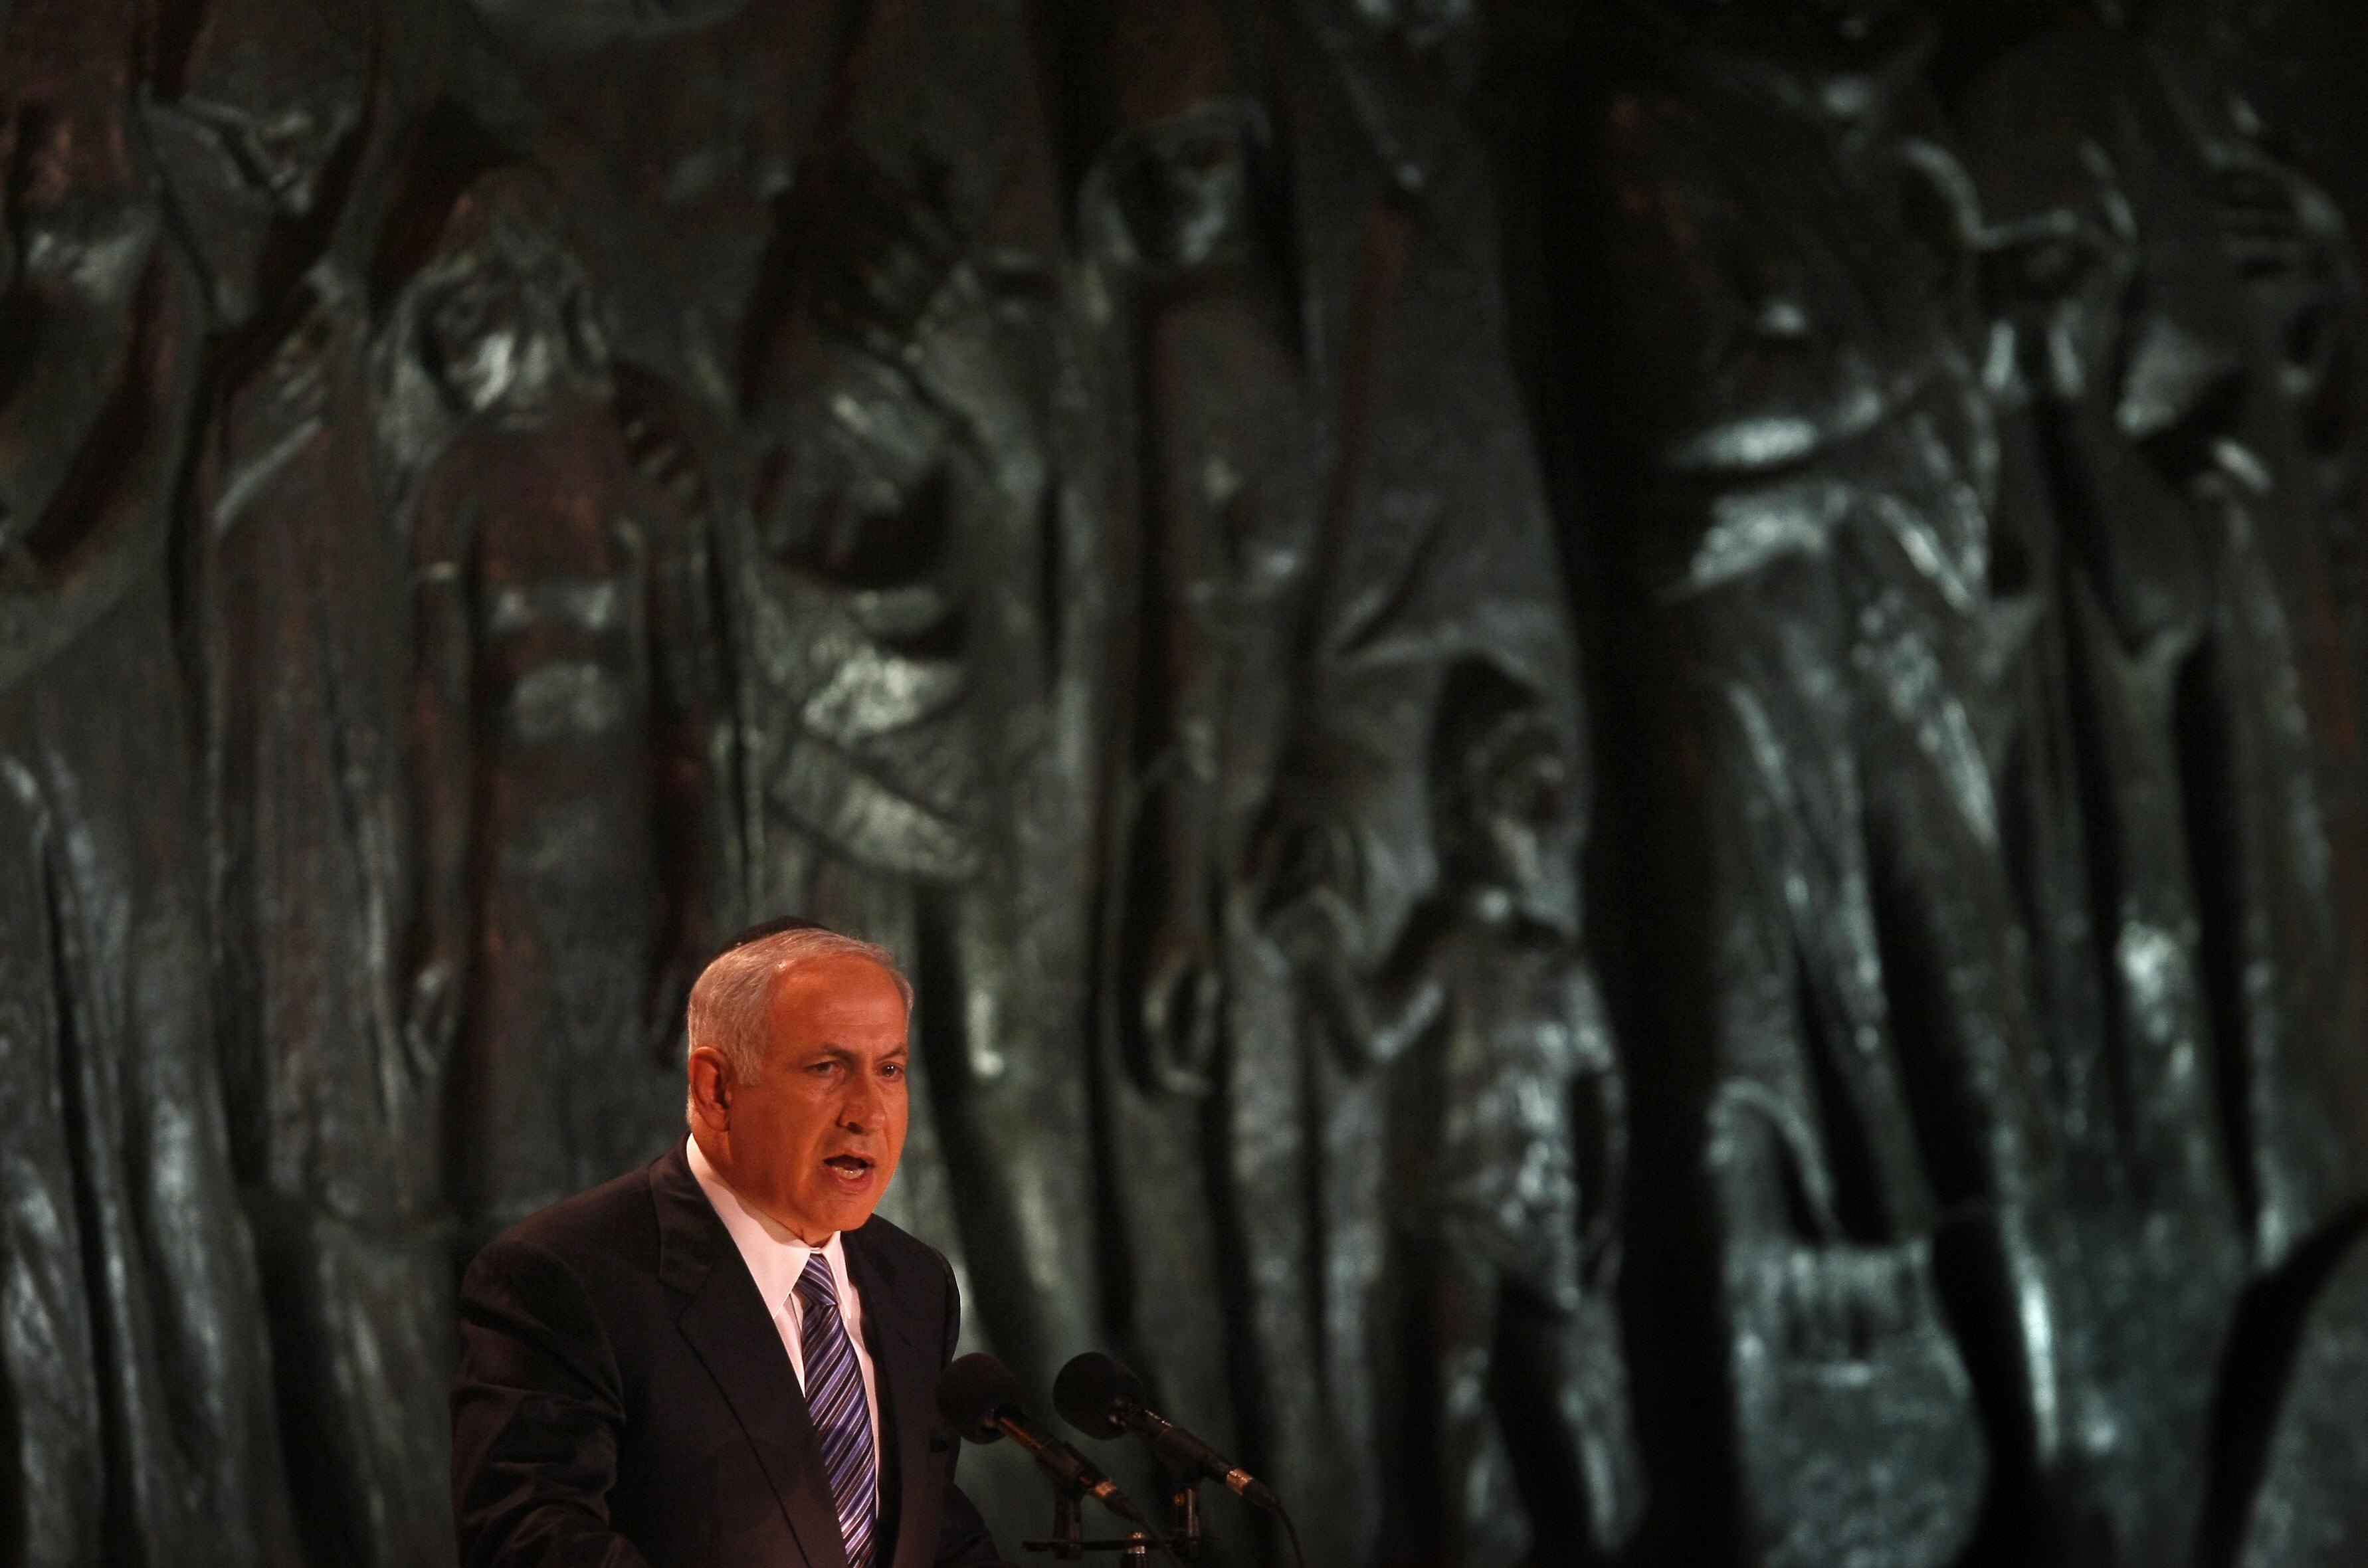 MENAHEM KAHANA/AFP/Getty Images. Israeli Prime Minister Benjamin Netanyahu speaks at the opening ceremony of the Holocaust Remembrance Day at the Yad Vashem Holocaust national memorial in Jerusalem, on April 20, 2009. Israel began marking Remembrance Day at sundown with a ceremony to the six million Jews killed by the Nazis during World War II. More than 230,000 Holocaust survivors currently live in Israel, according to estimates by advocacy groups.